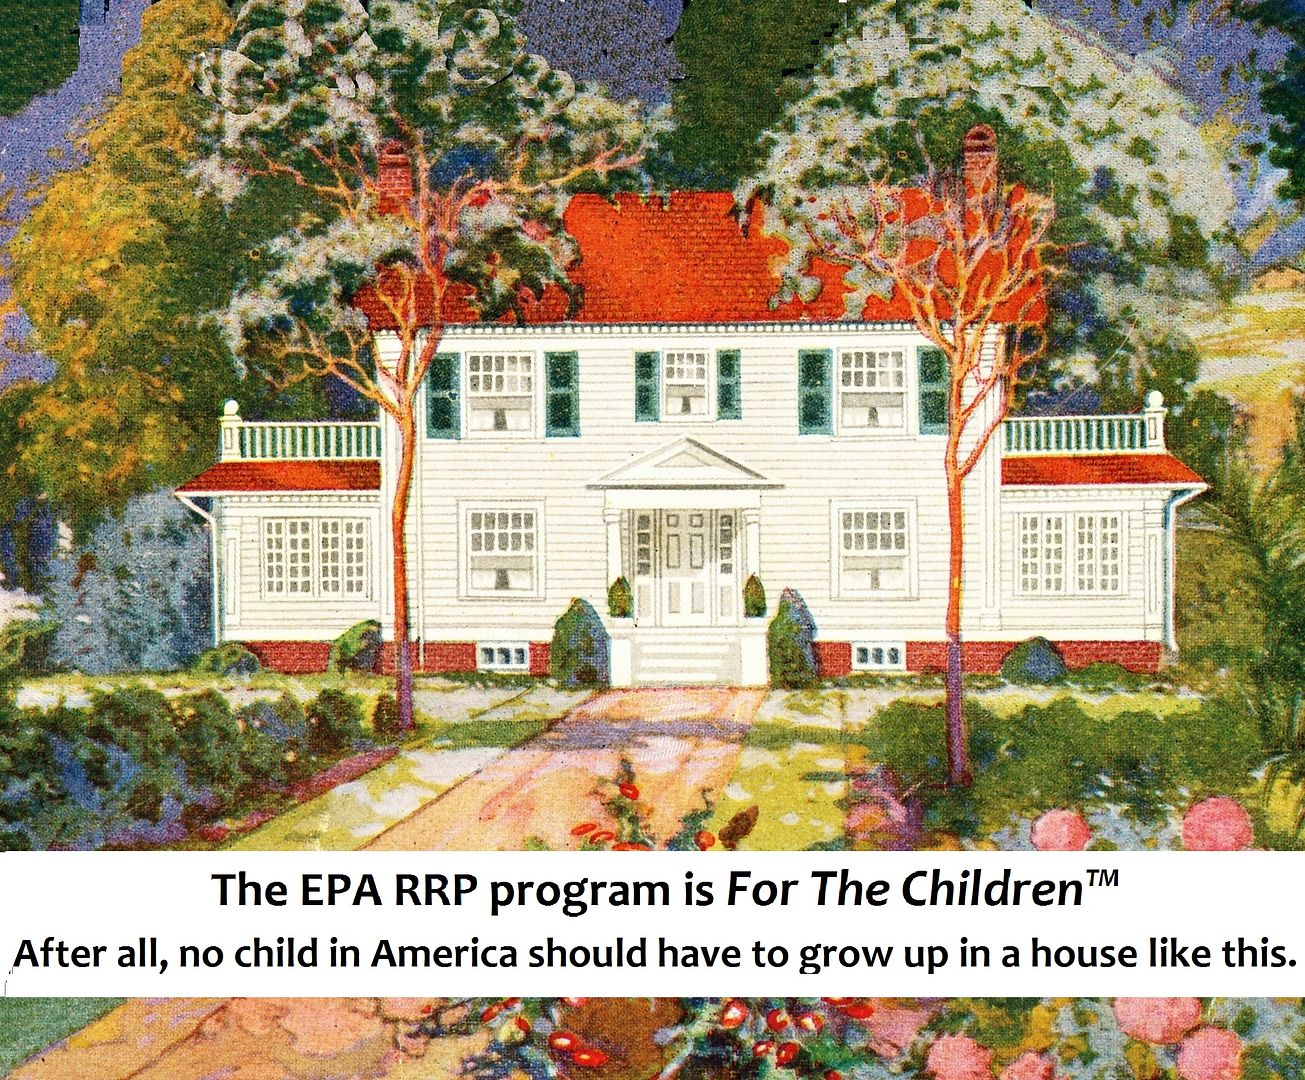 Advance copy of a new promotional campaign by the EPA